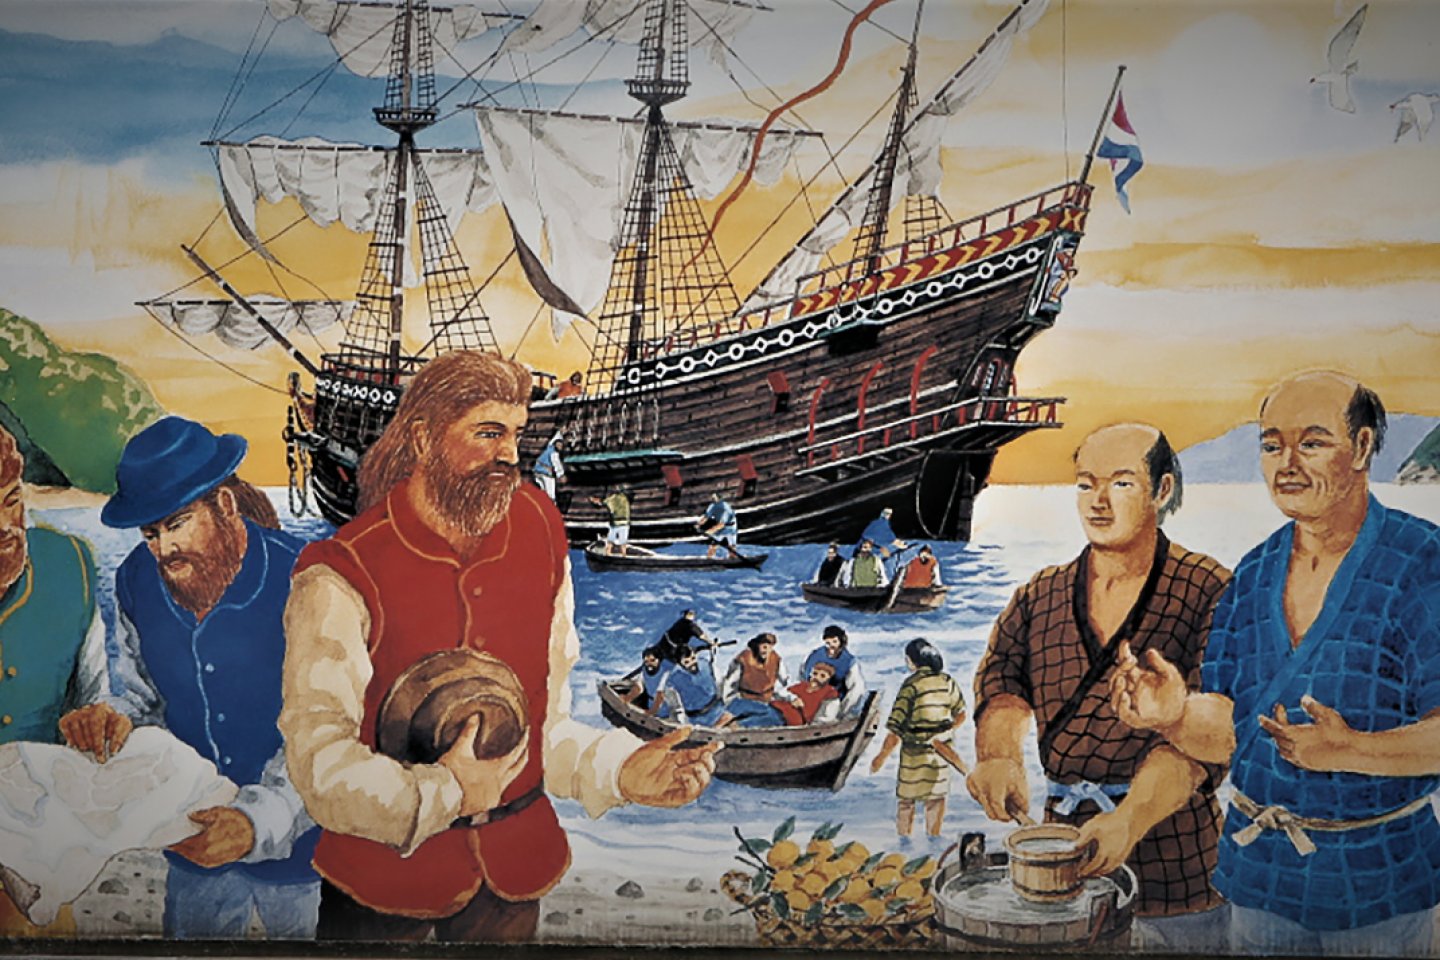 The arrival of the ship Liefde at the coast of Kyushu. William Adams wears a blue hat and clothes, and Jan Joosten red clothes. It was their first encounter with the Japanese in 1600.